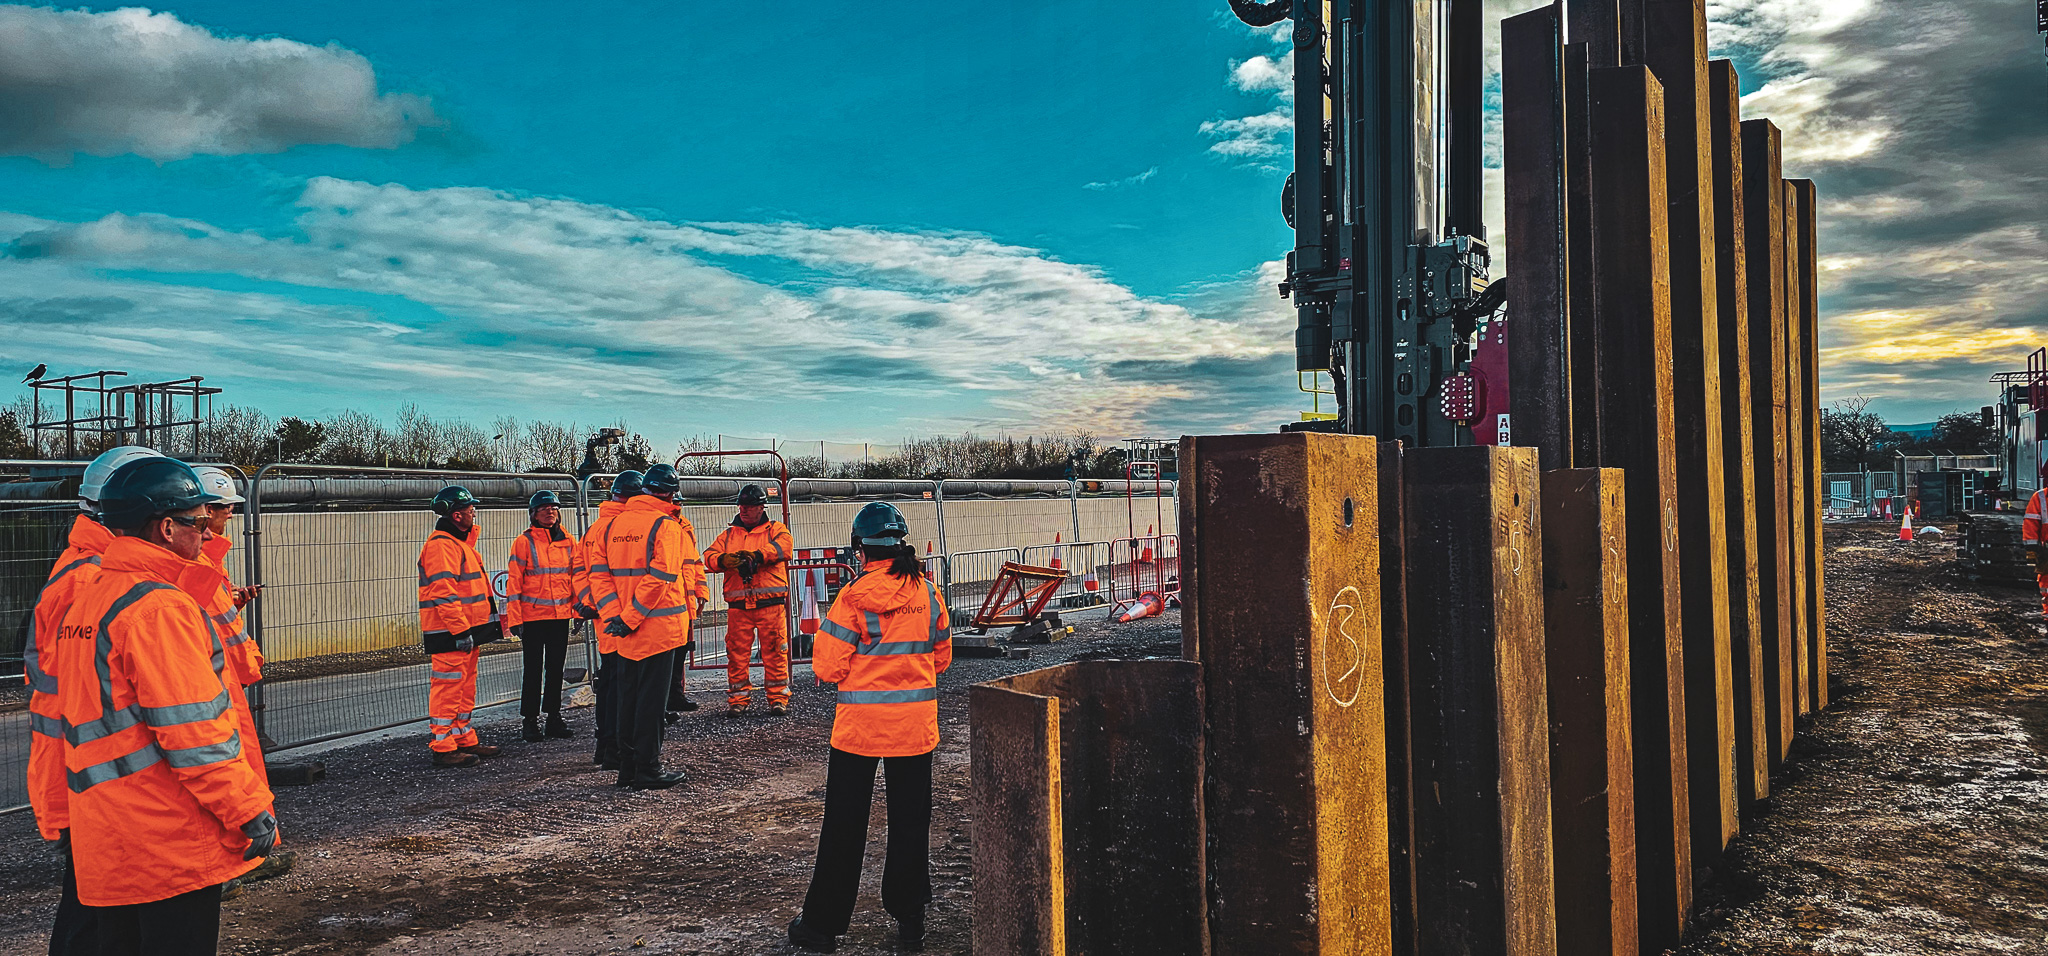 We were delighted to recently welcome the Renew Holdings plc Board to the project we are carrying out on behalf of Wessex Water at Holdenhurst, on the outskirts of Bournemouth.